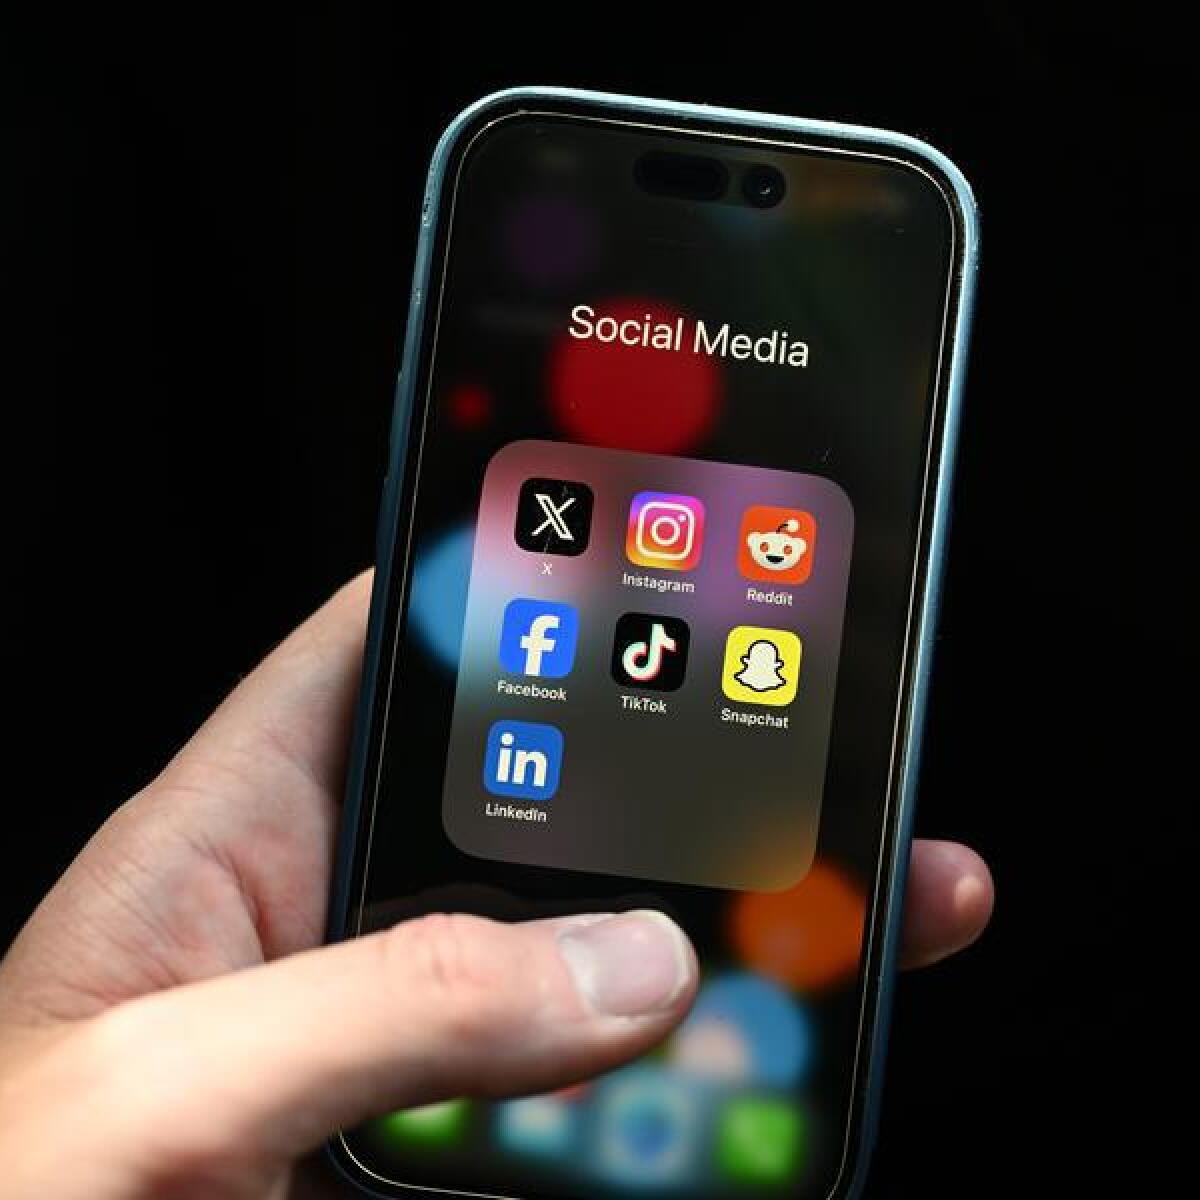 Social media apps seen on a smartphone (file image)